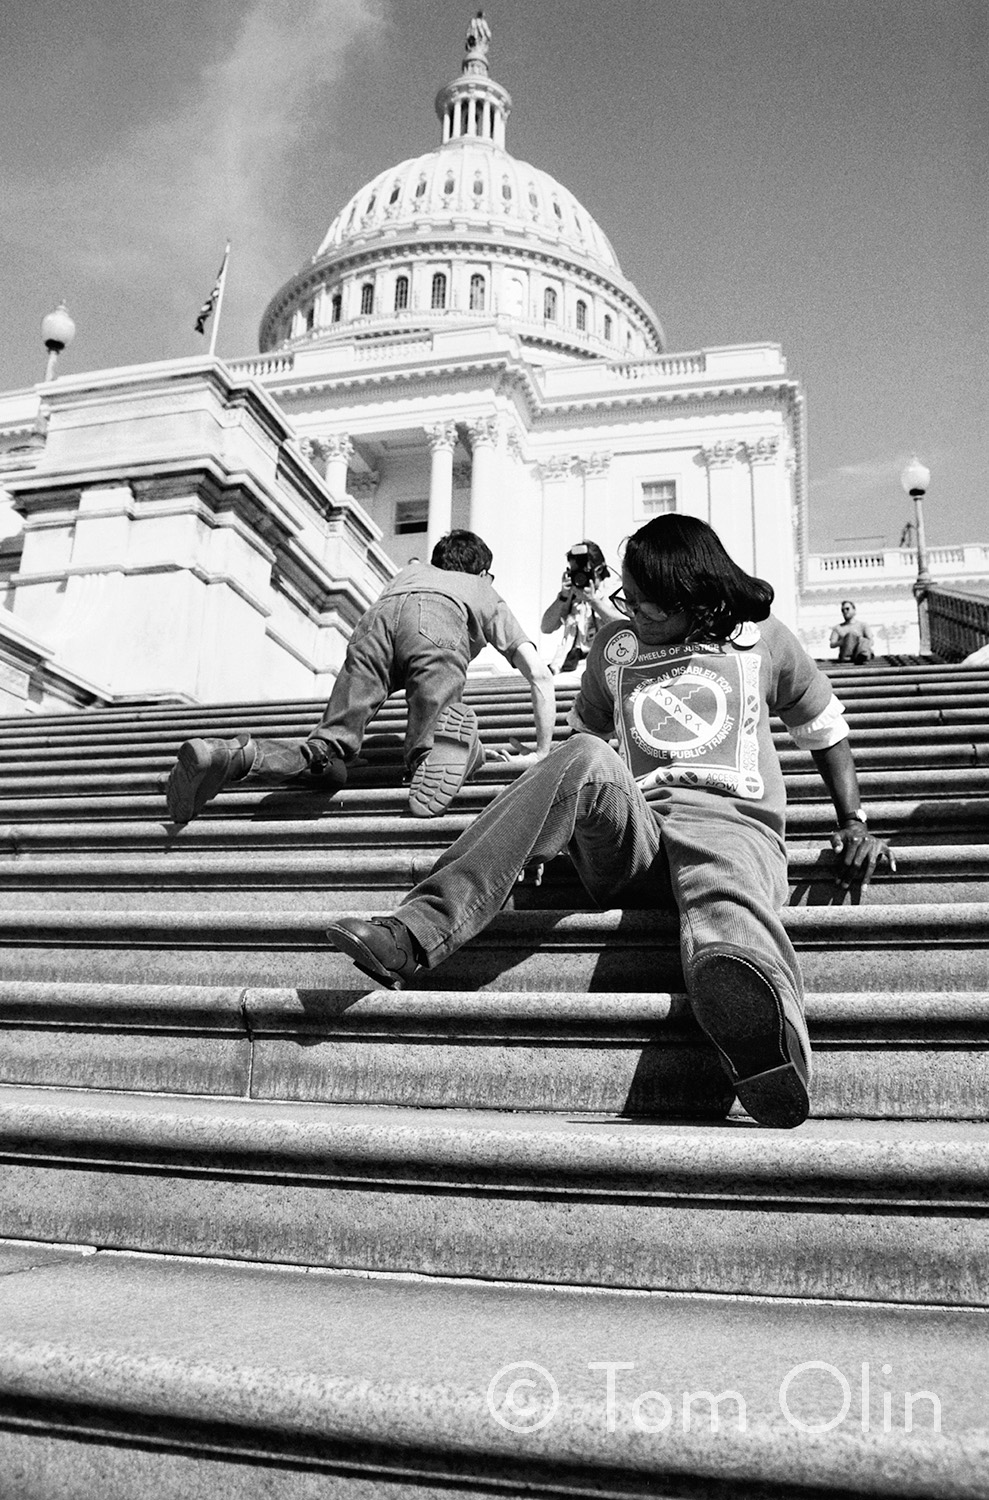 Black and white photo of people crawling up the steps of the U.S. Capitol building in Washington, DC